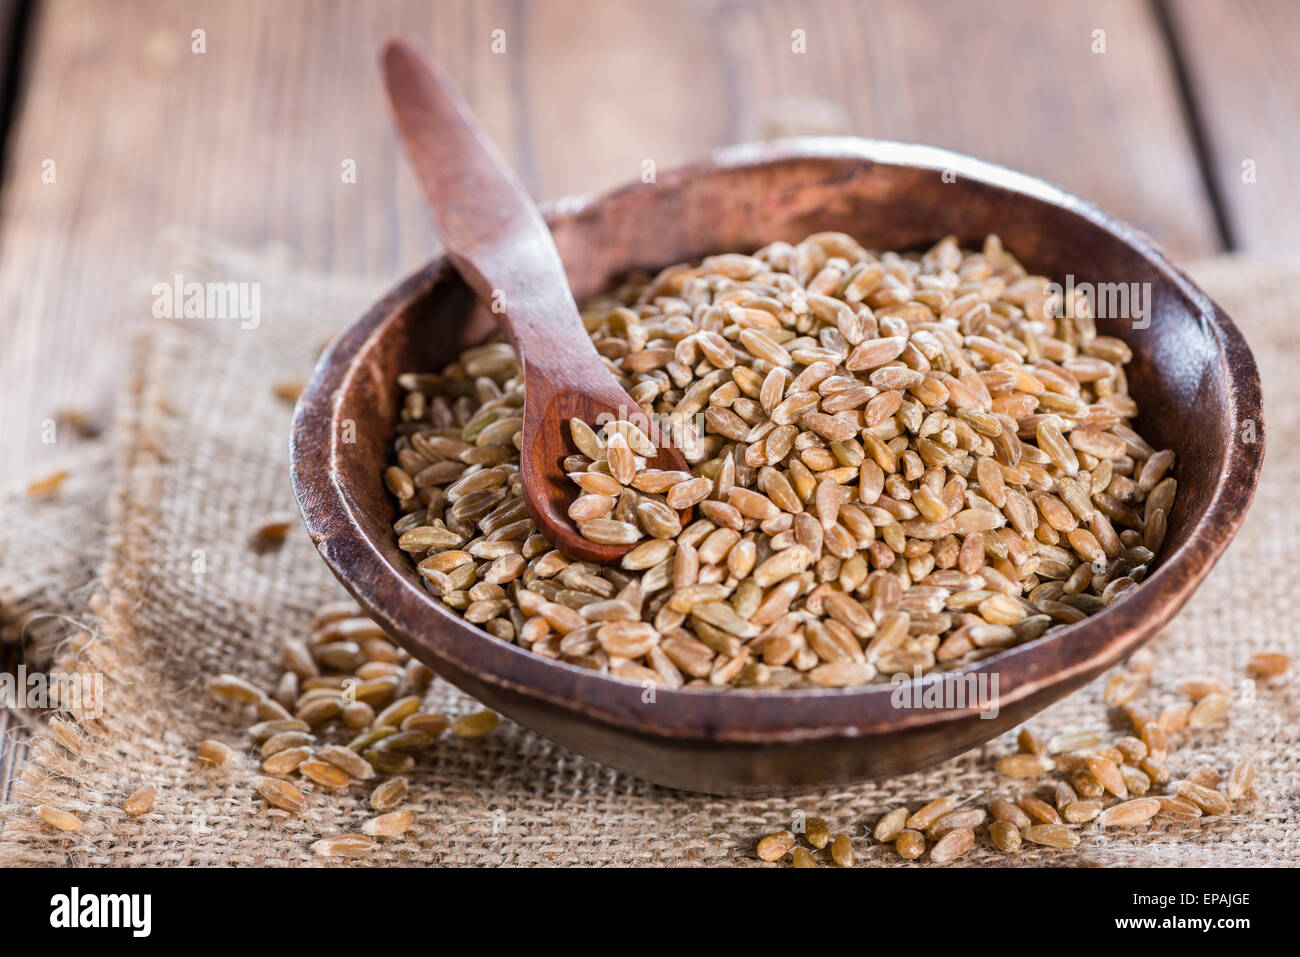 Bowl with Spelt (close-up shot) on wooden background Stock Photo